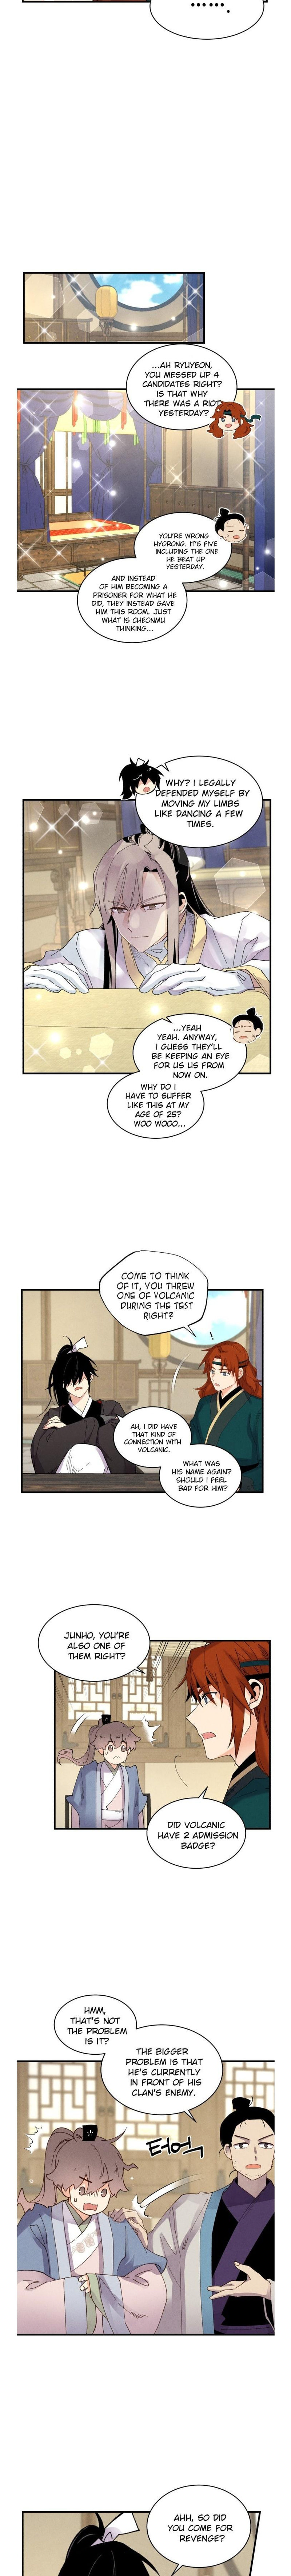 Lightning Degree - Chapter 80 Page 6